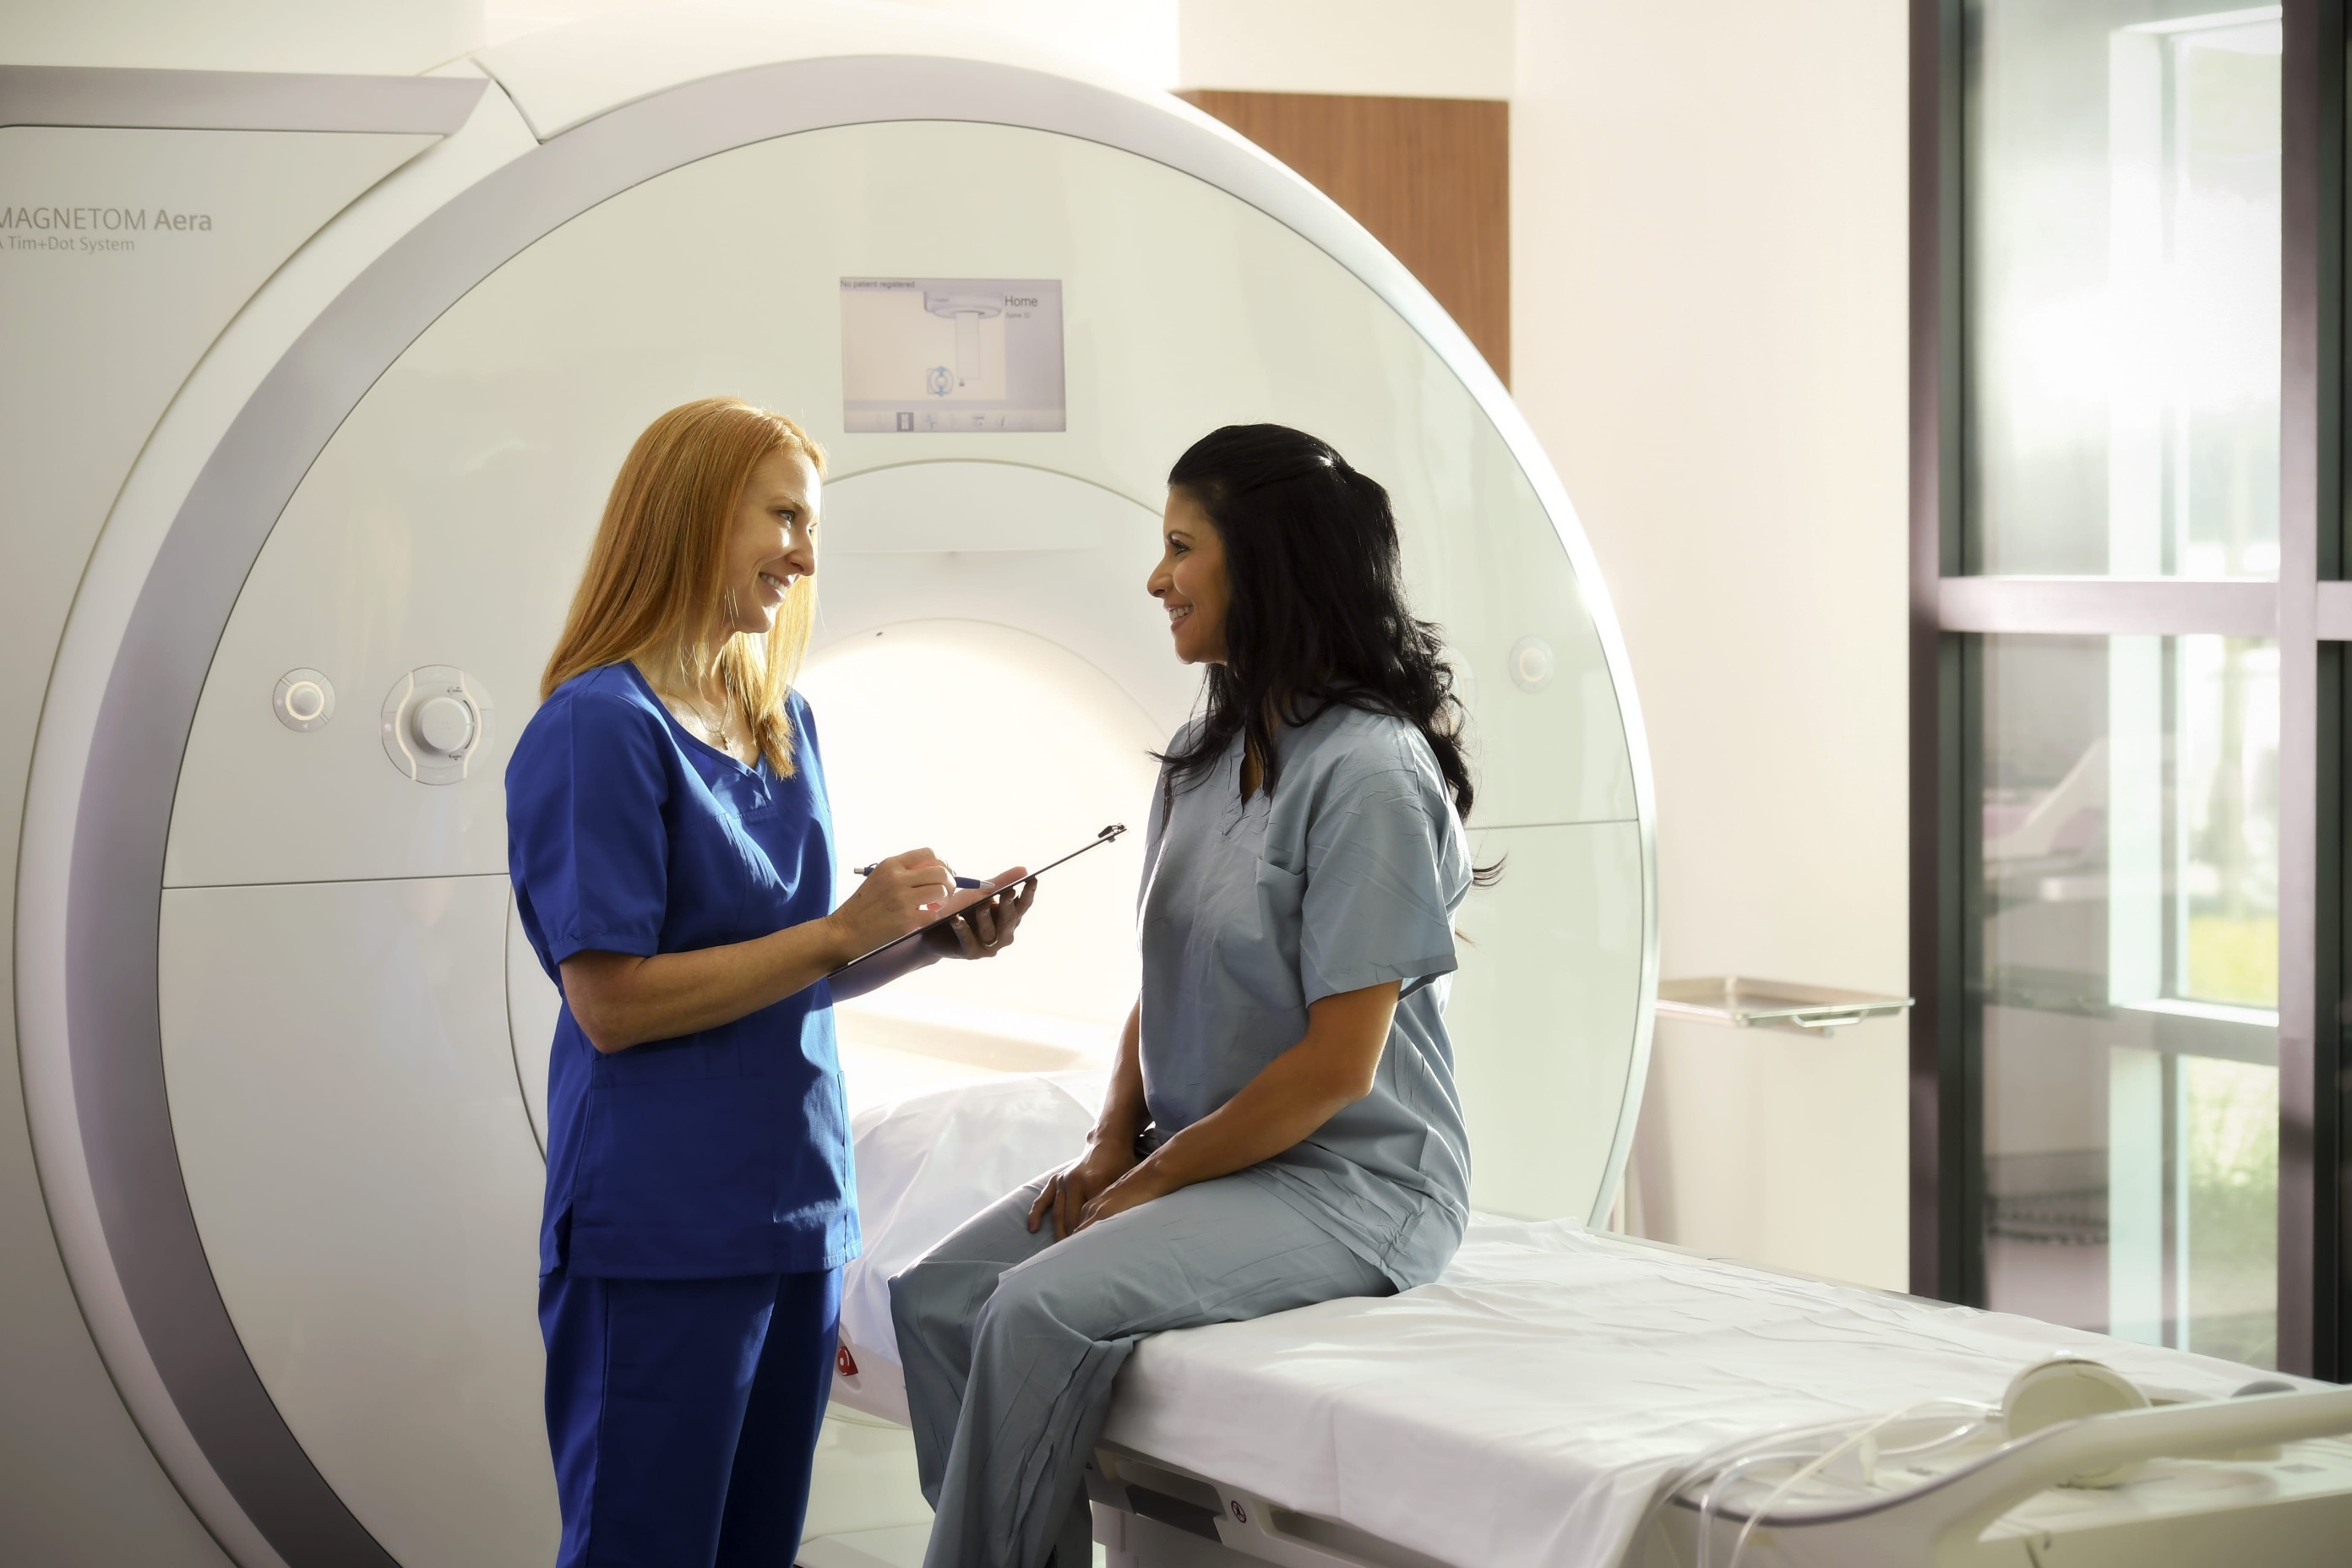 A breast cancer patient and breast cancer care specialist discuss treatment options in front of a CT scan machine